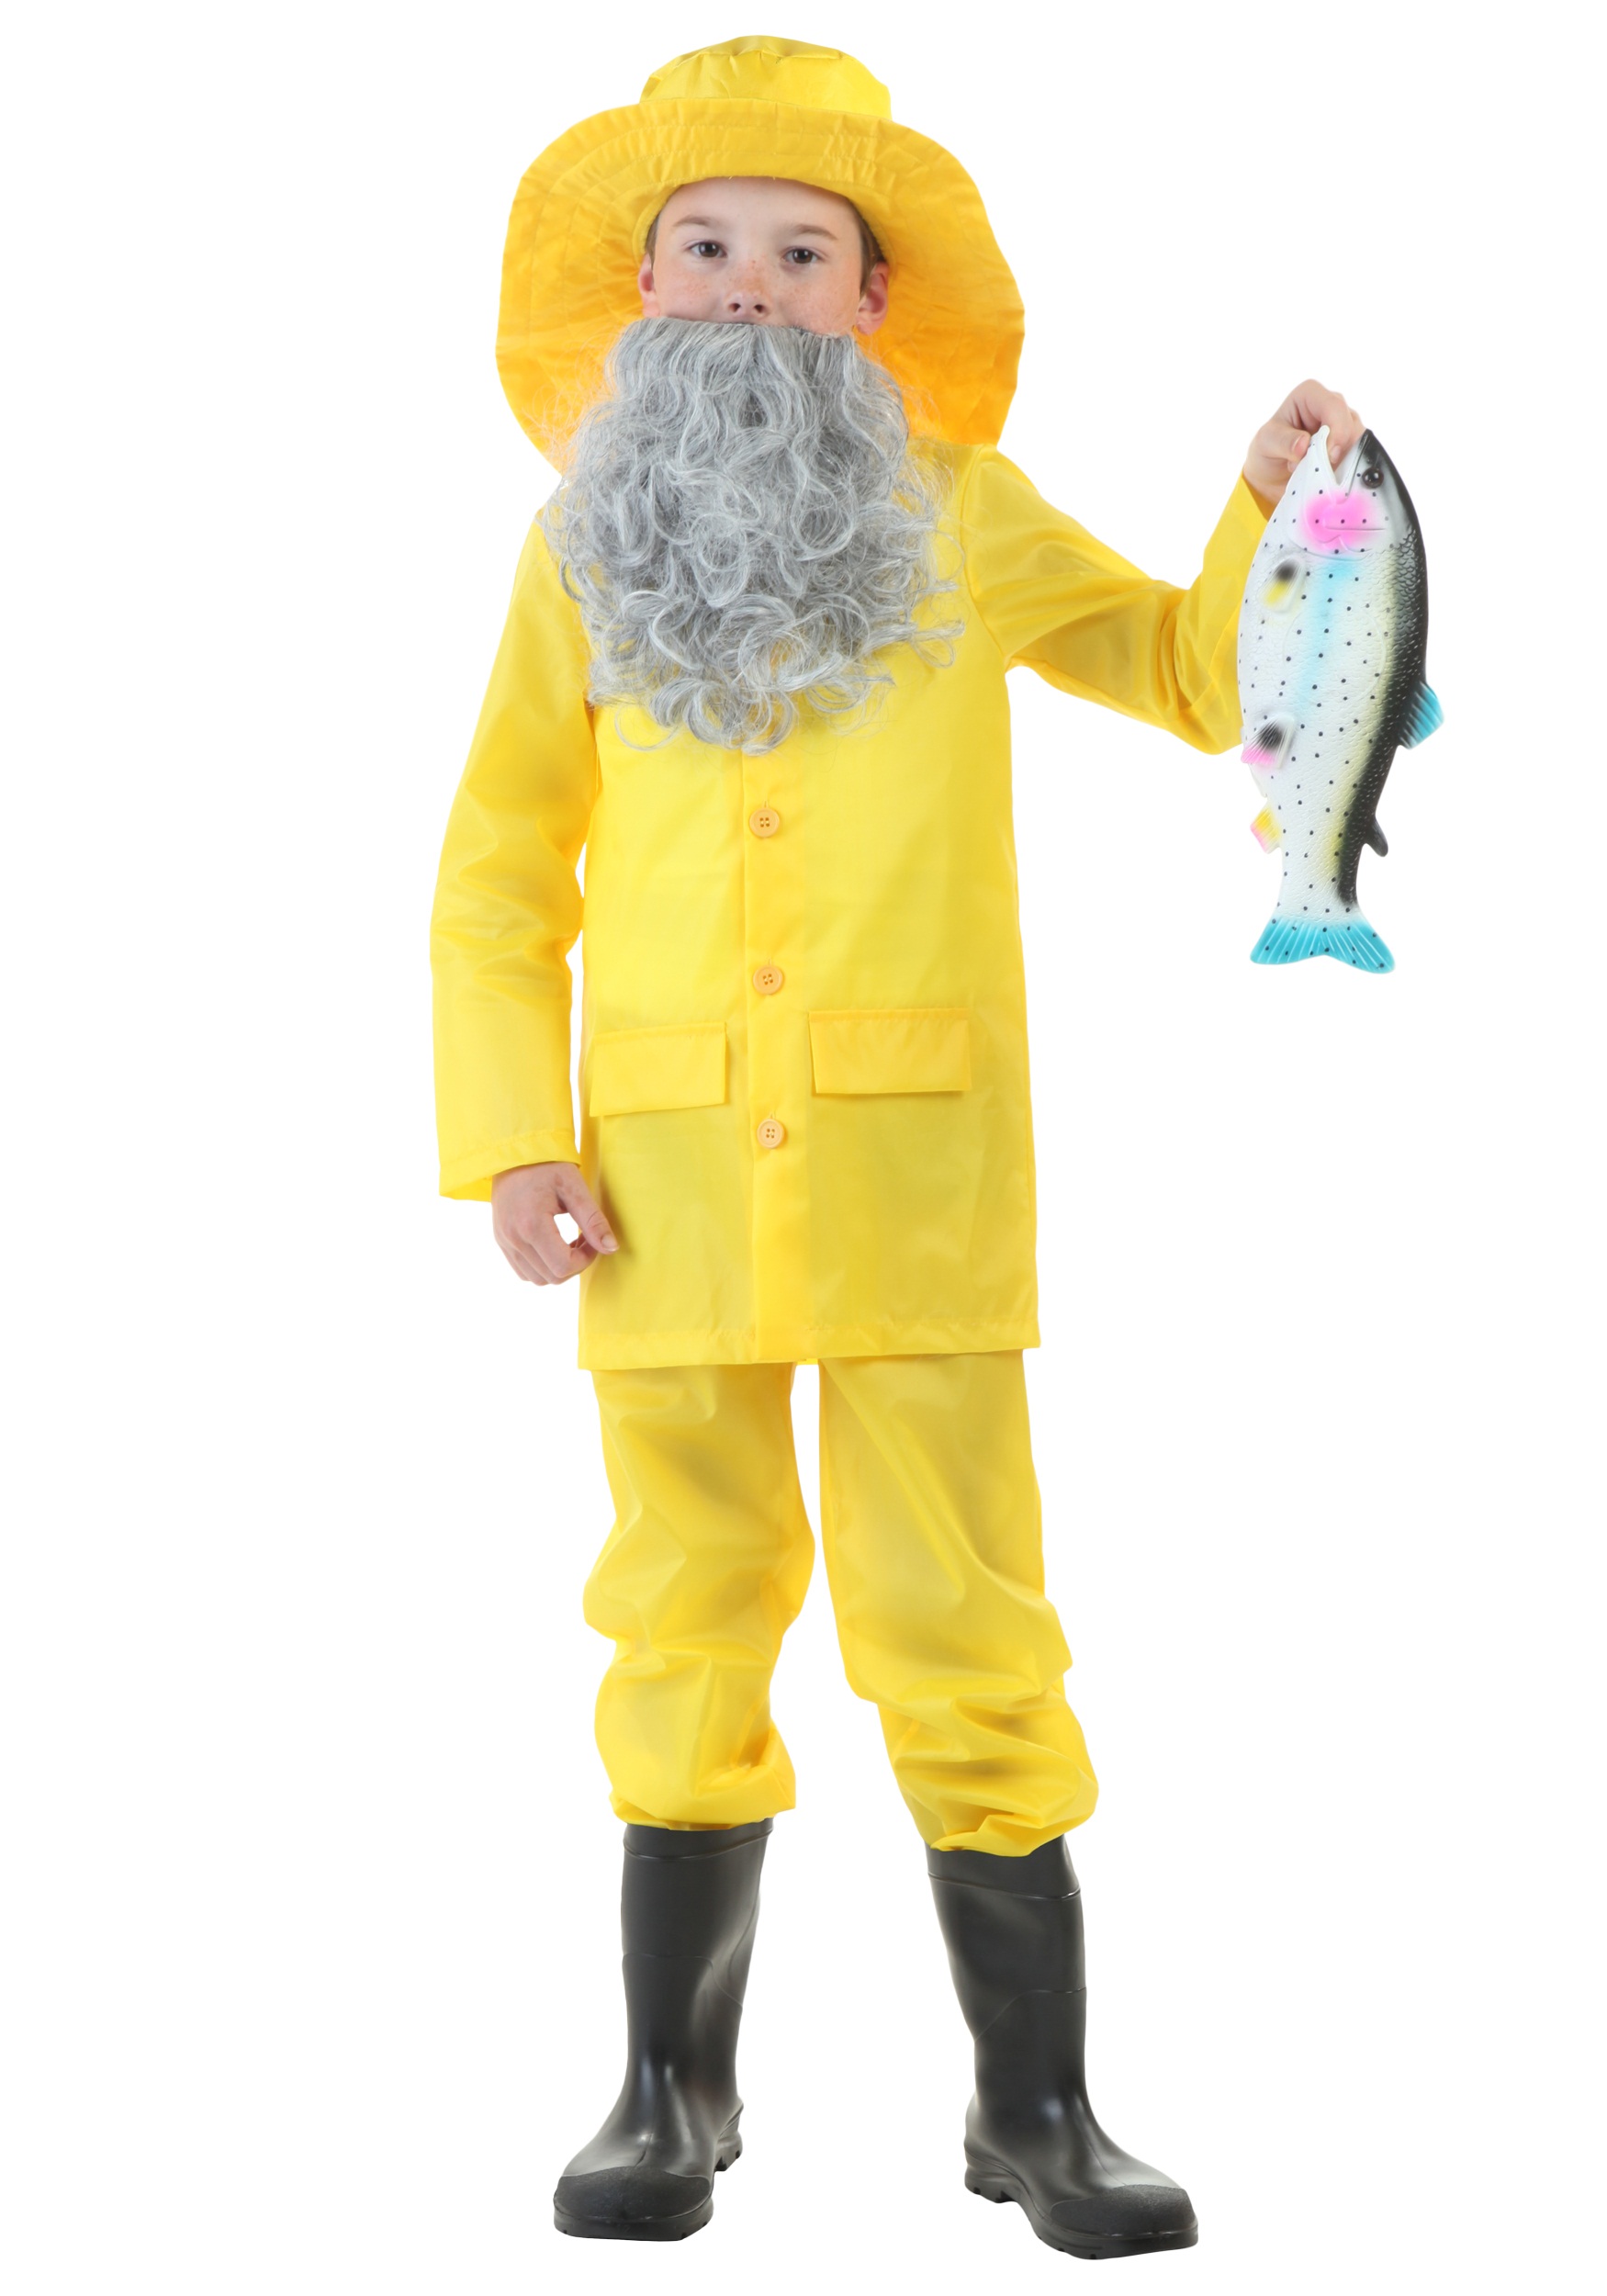 Gone fishing' costume  Fish costume, Costumes, Clothes